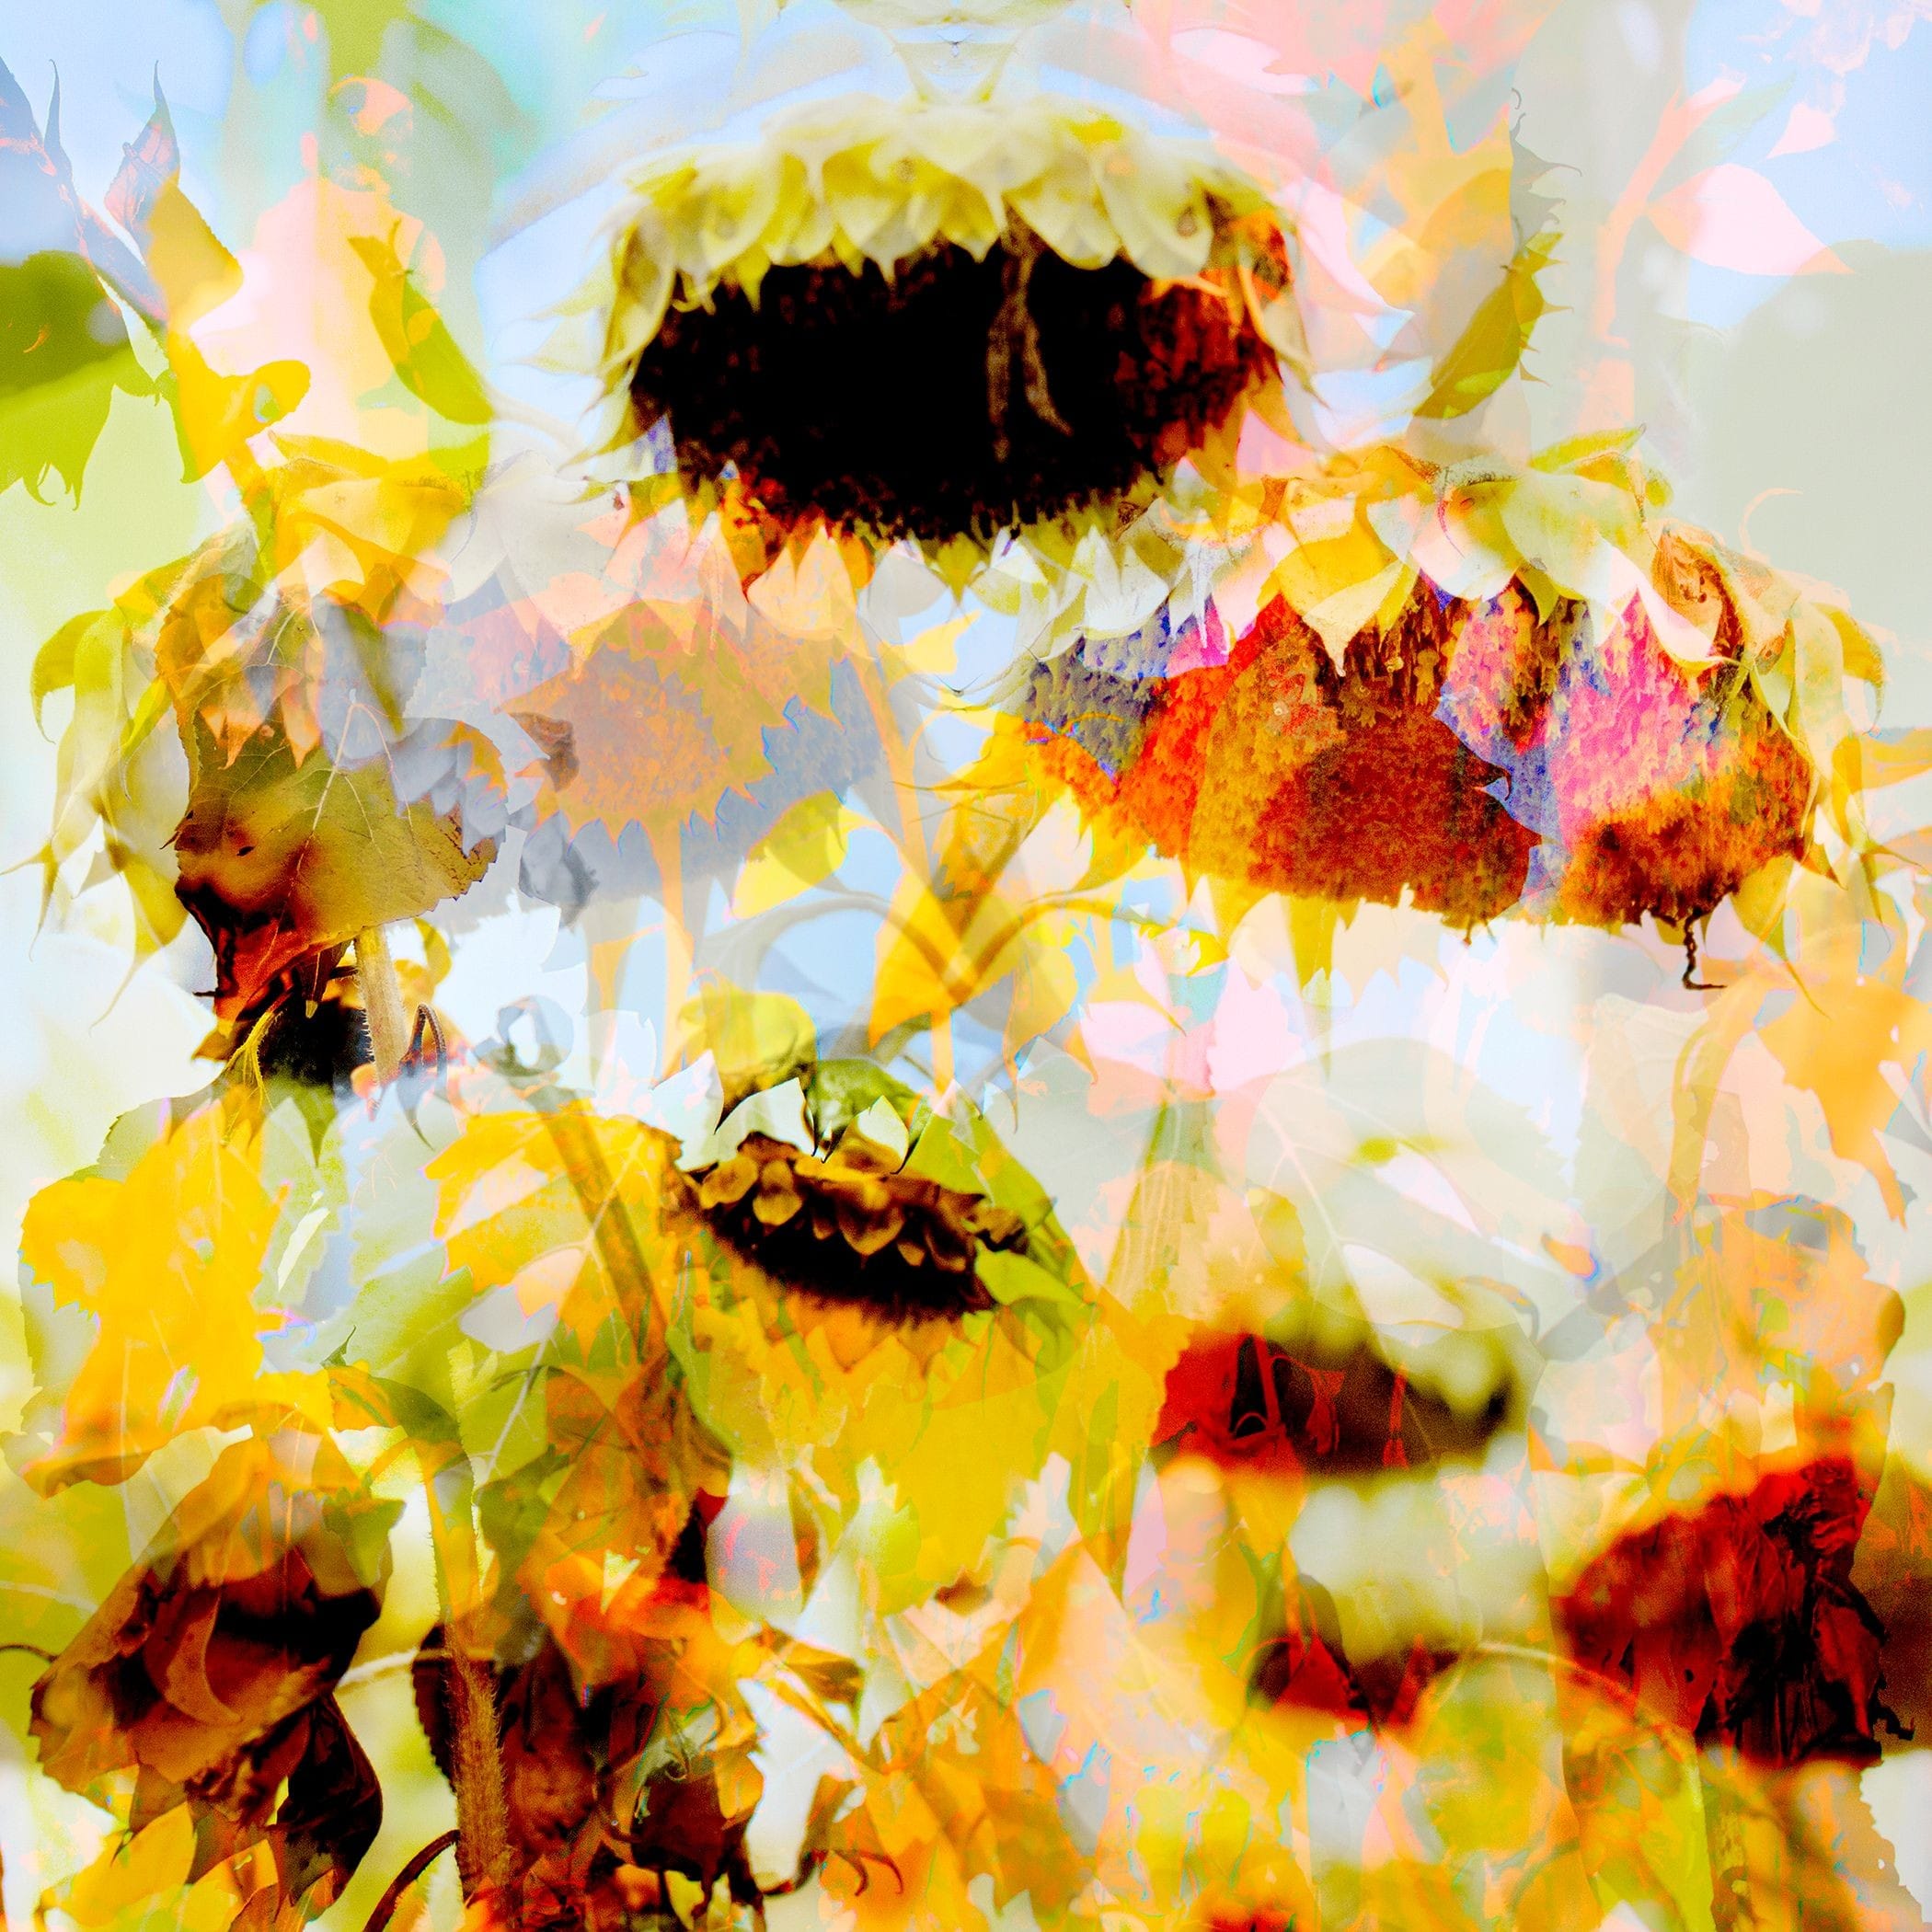 Colorful and graphic abstract layers of sunflowers